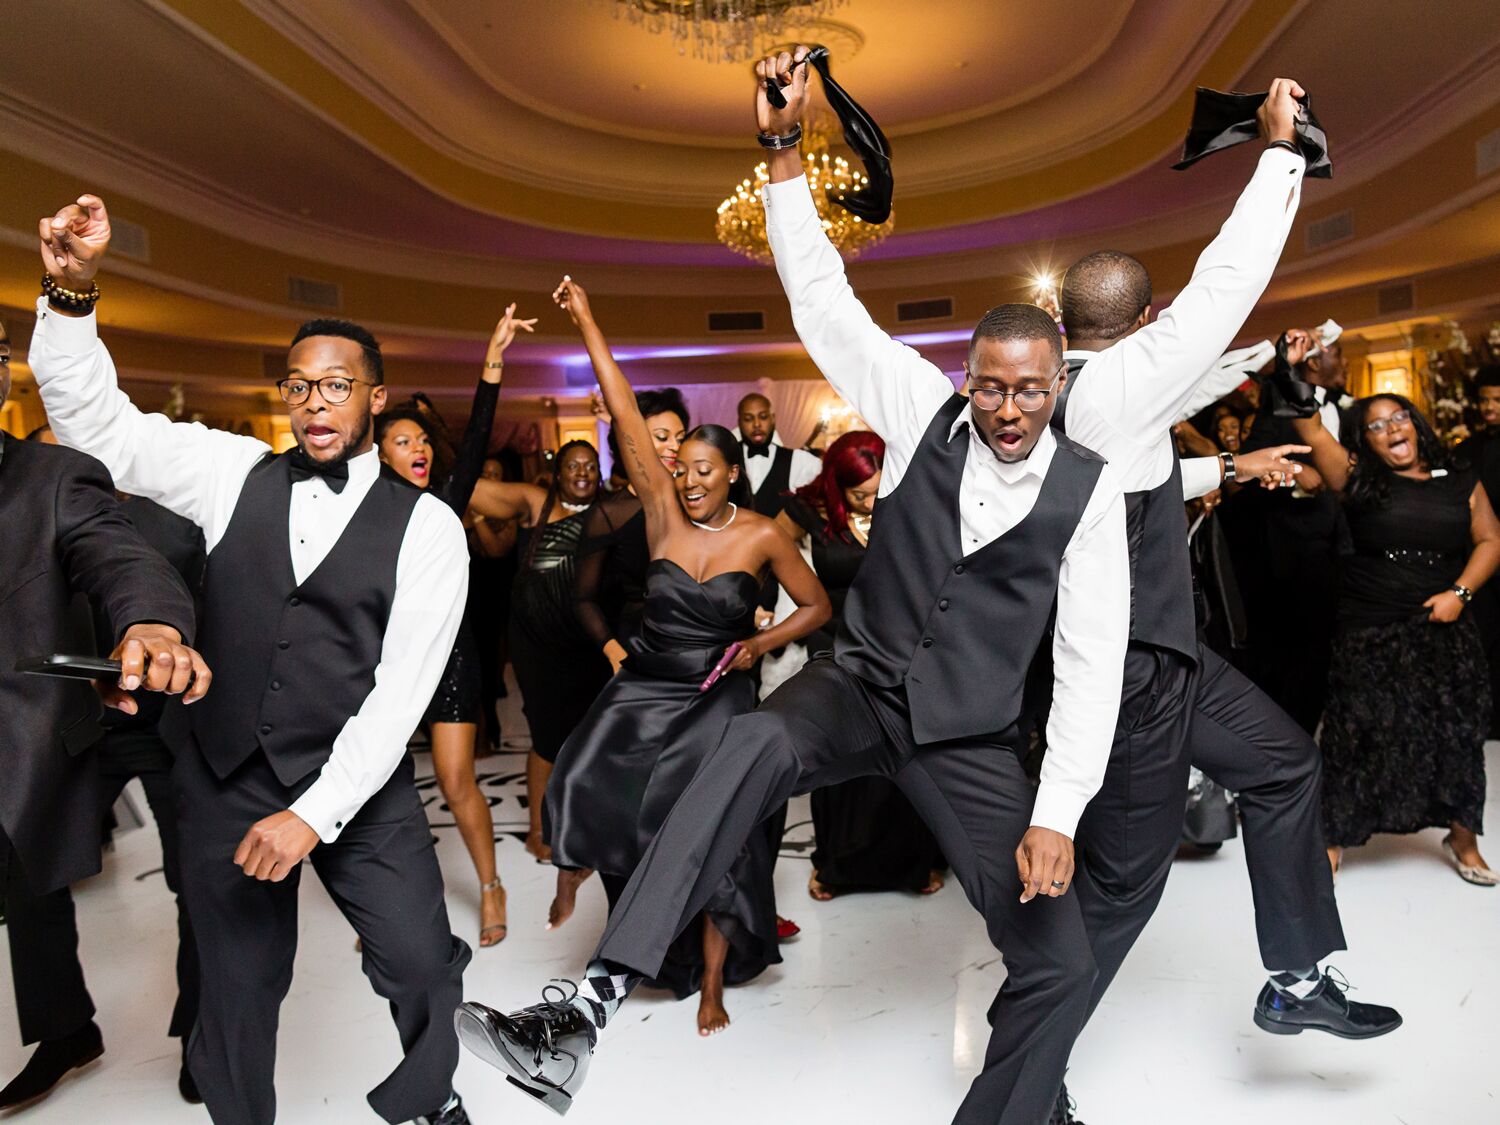 The Best Wedding First Dance Songs from the 2000s